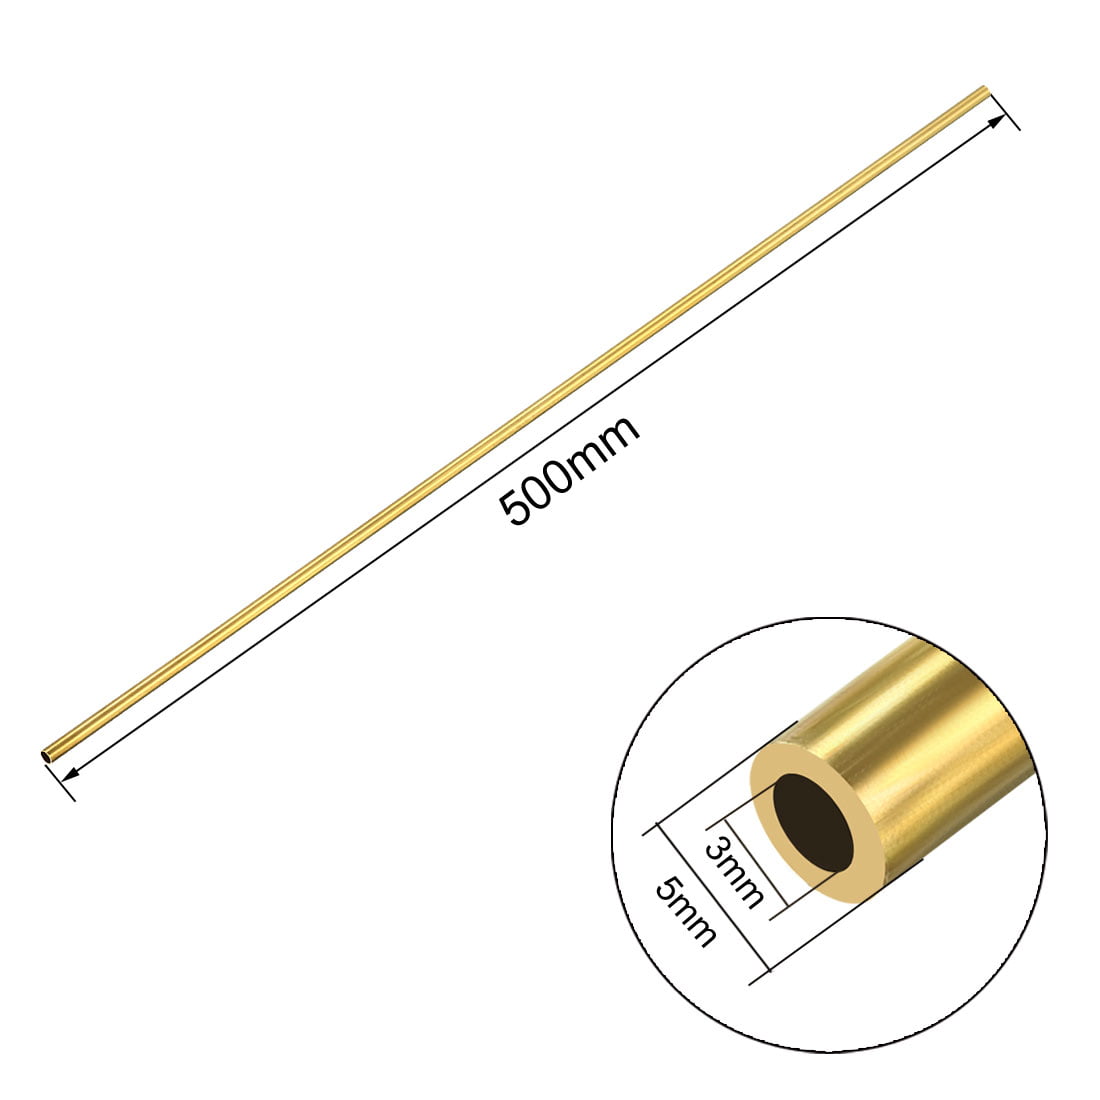 uxcell 2PCS 7mm x 8mm x 500mm Brass Pipe Tube Round Bar Rod for RC Boat 